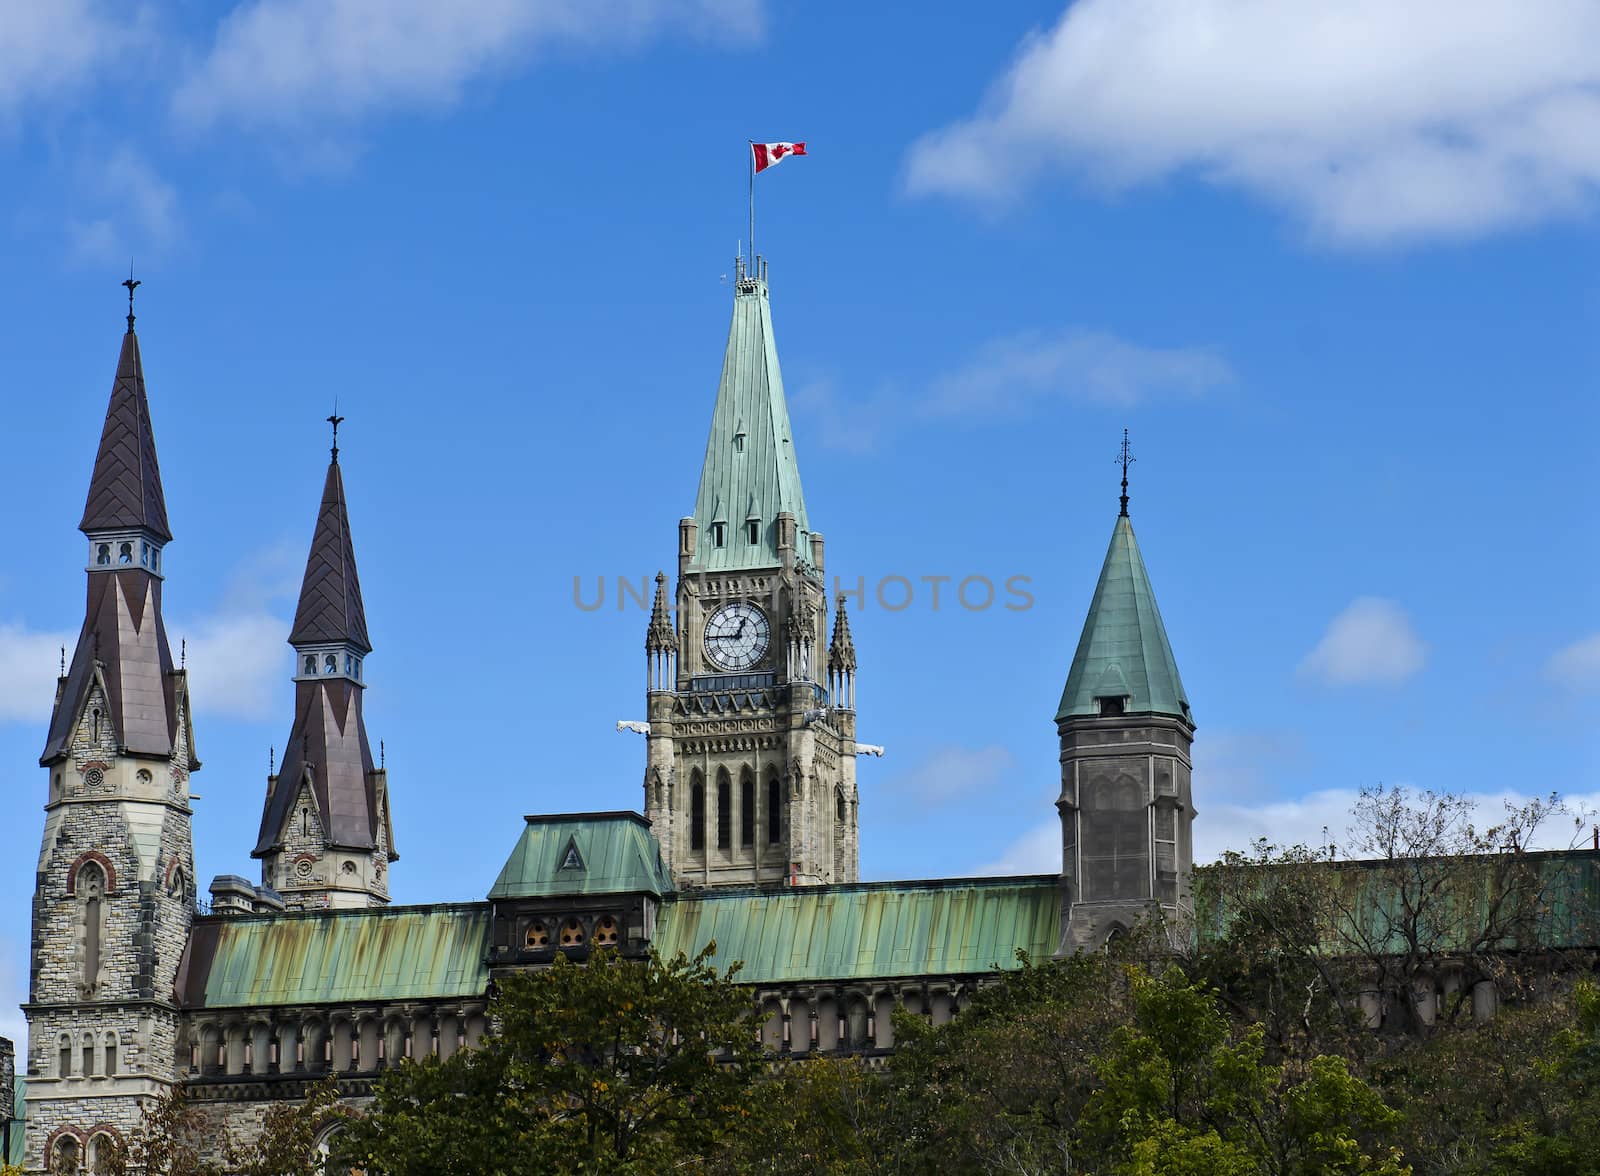 The canadian Parliament Centre and West Block towers in Ottawa, Canada.